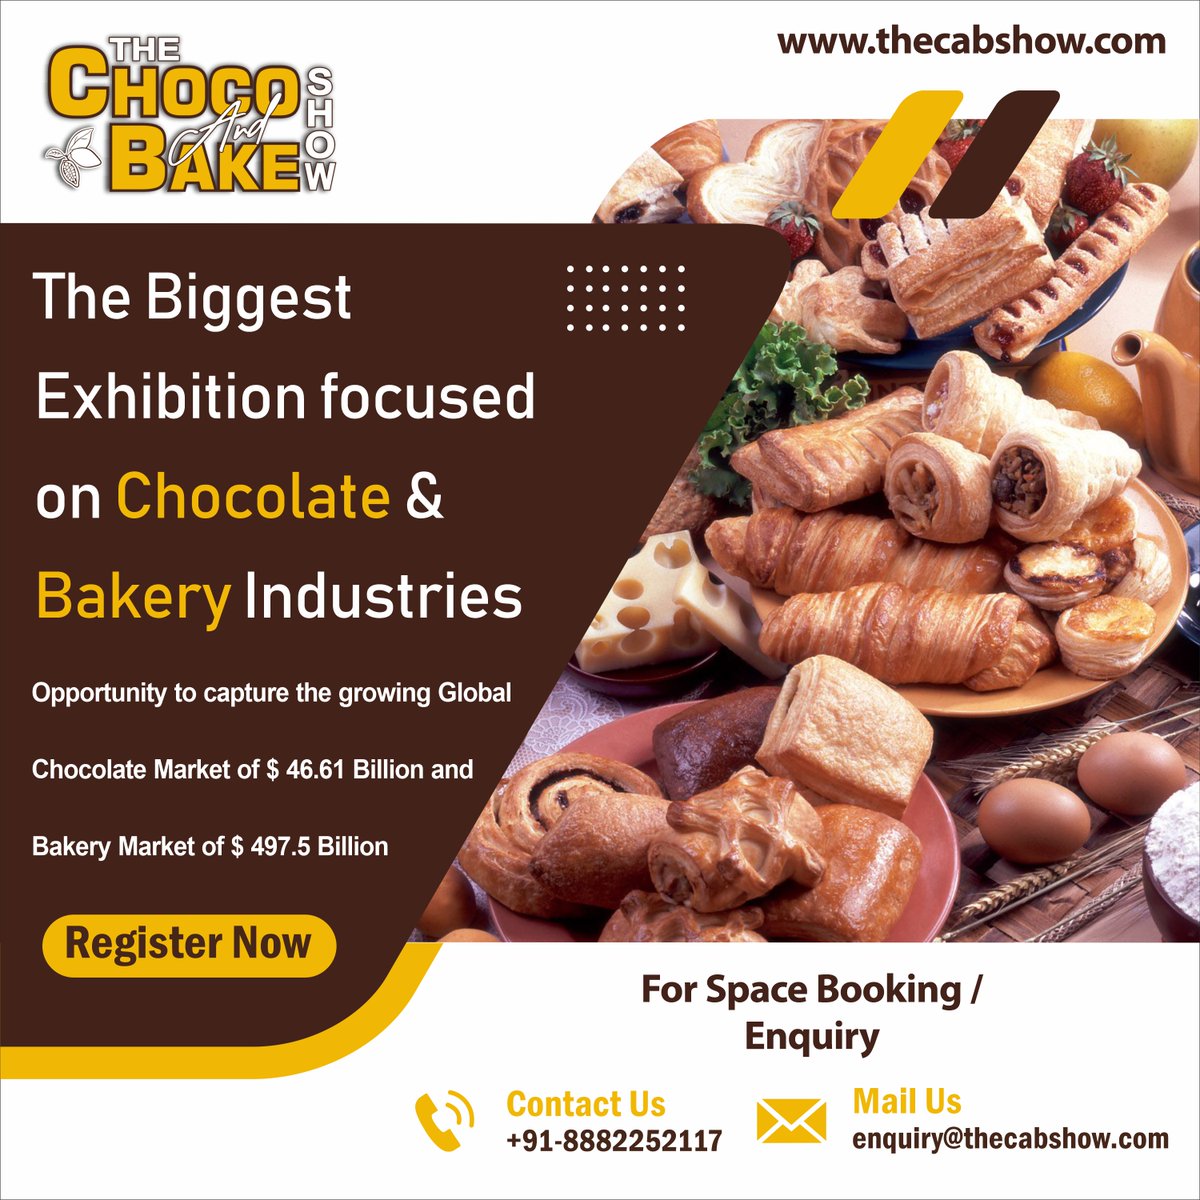 The Biggest Exhibition is upcoming.

#food #india #expo #rice #flourmill #machine #machinery #upcomingshow2023
#chocolatepackaging #bakeshoworganizer #catering #exhibition #thecabshow
#upcomingexhibition #packaging #flourbrands #expo #fortified #processing